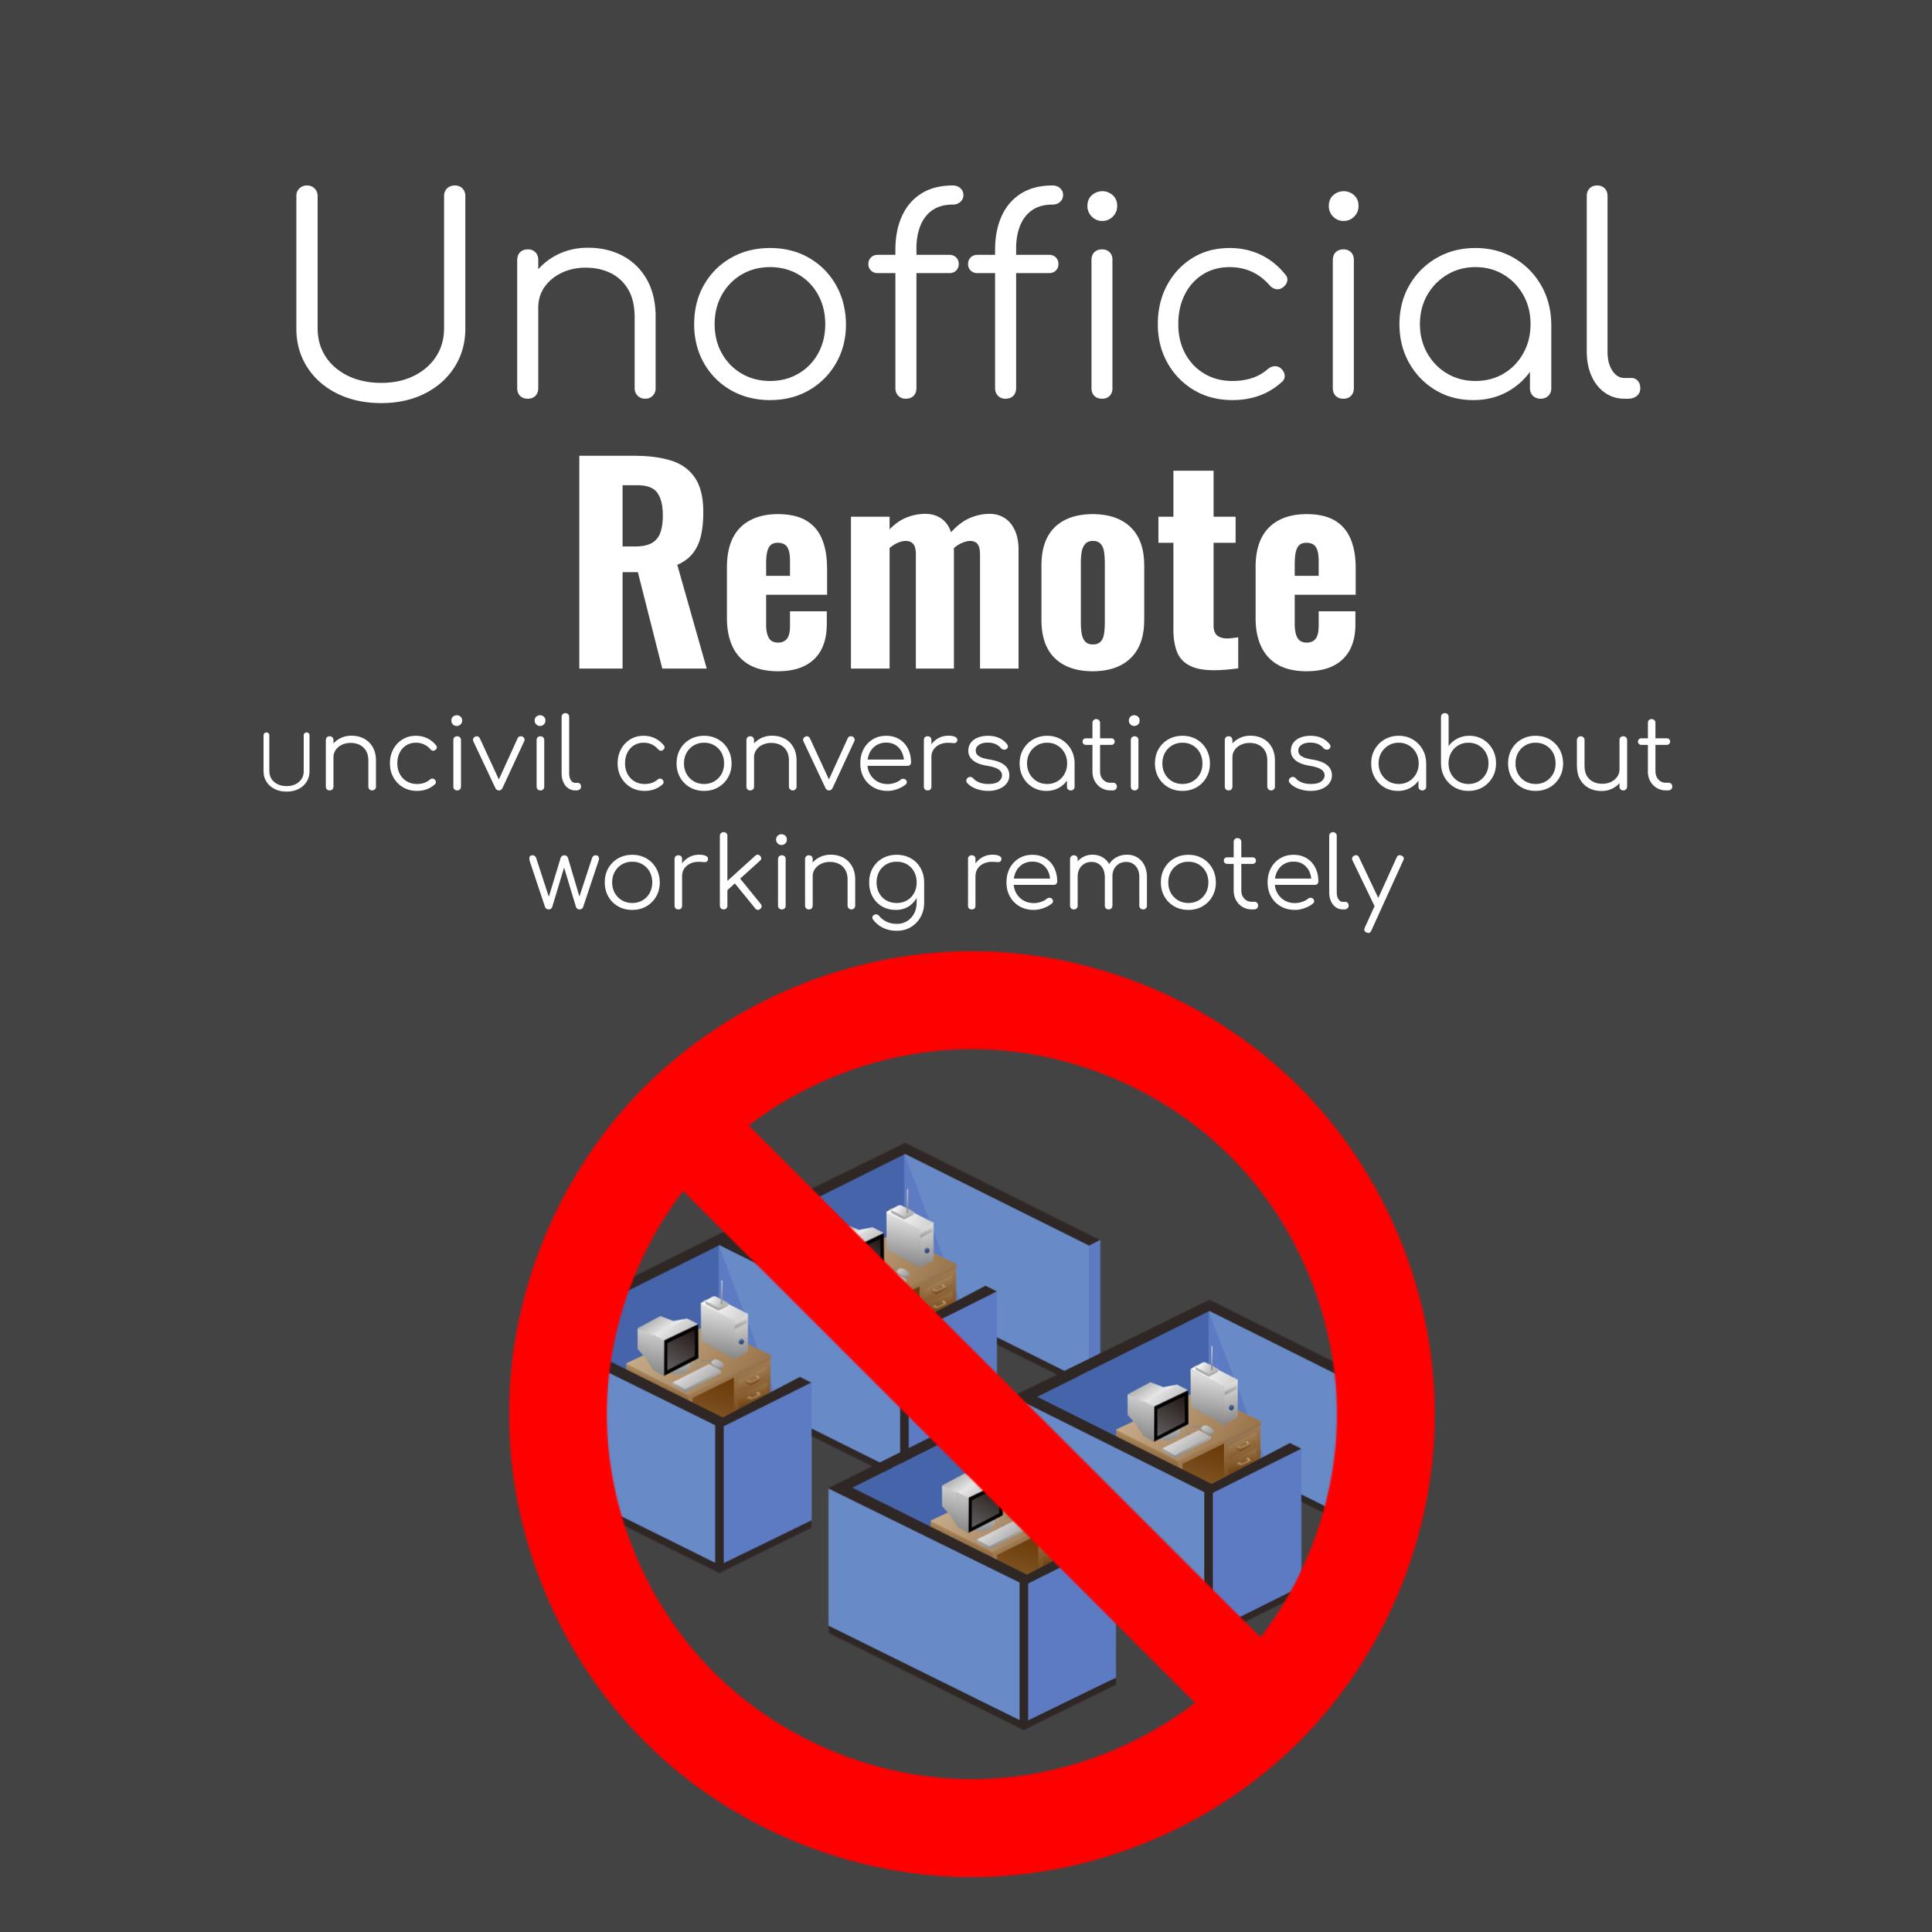 Remote Incentive Programs: Cities and towns offer perks to remote workers  